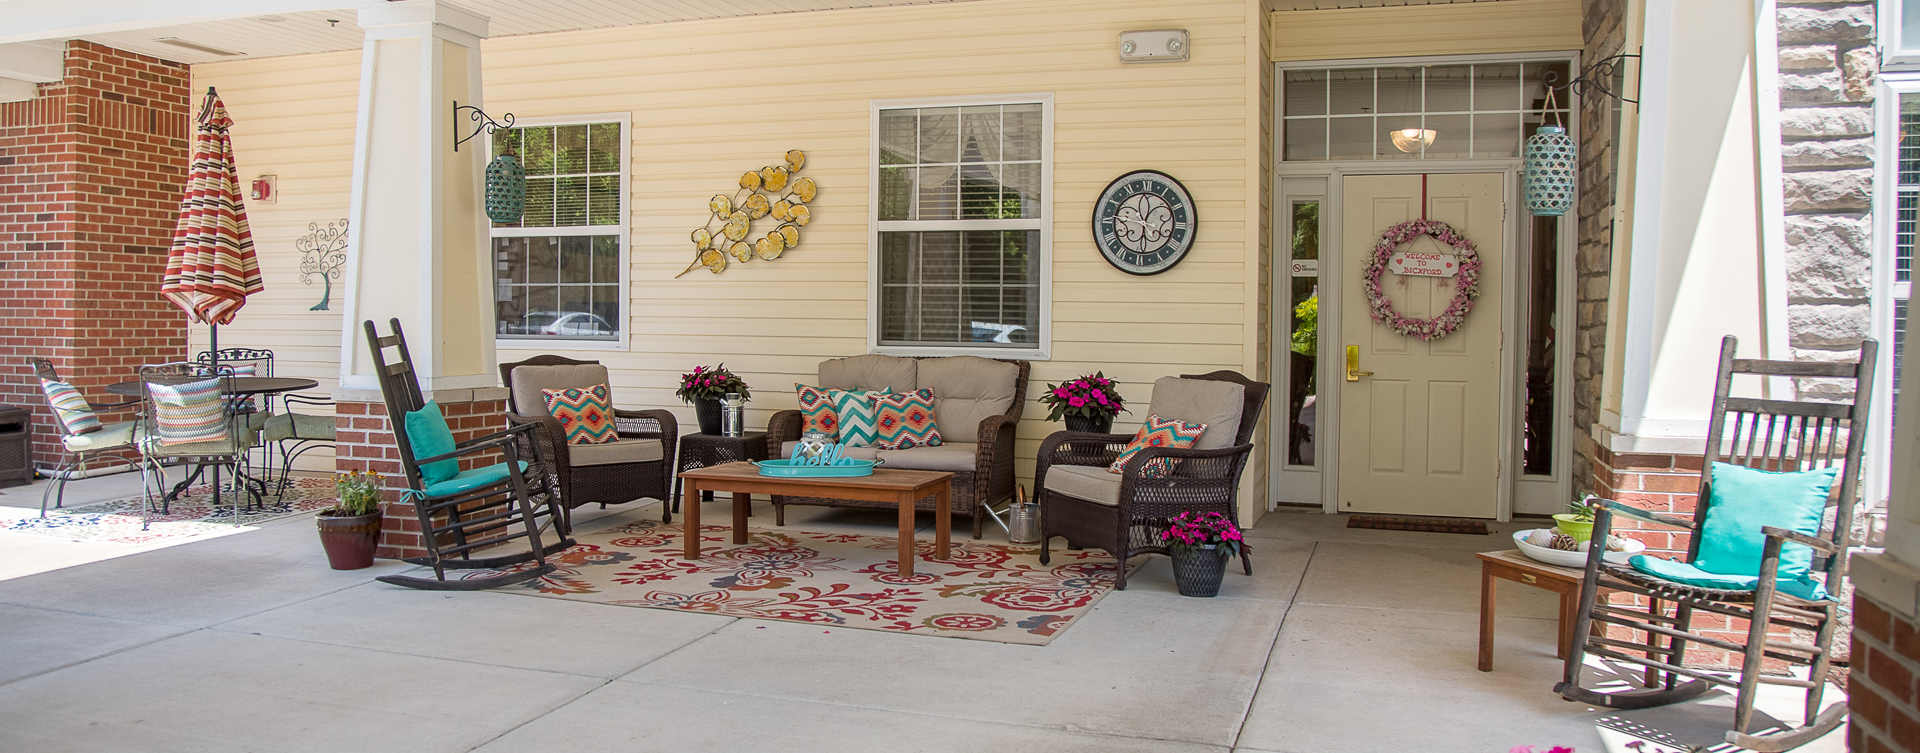 Enjoy conversations with friends on the porch at Bickford of Moline